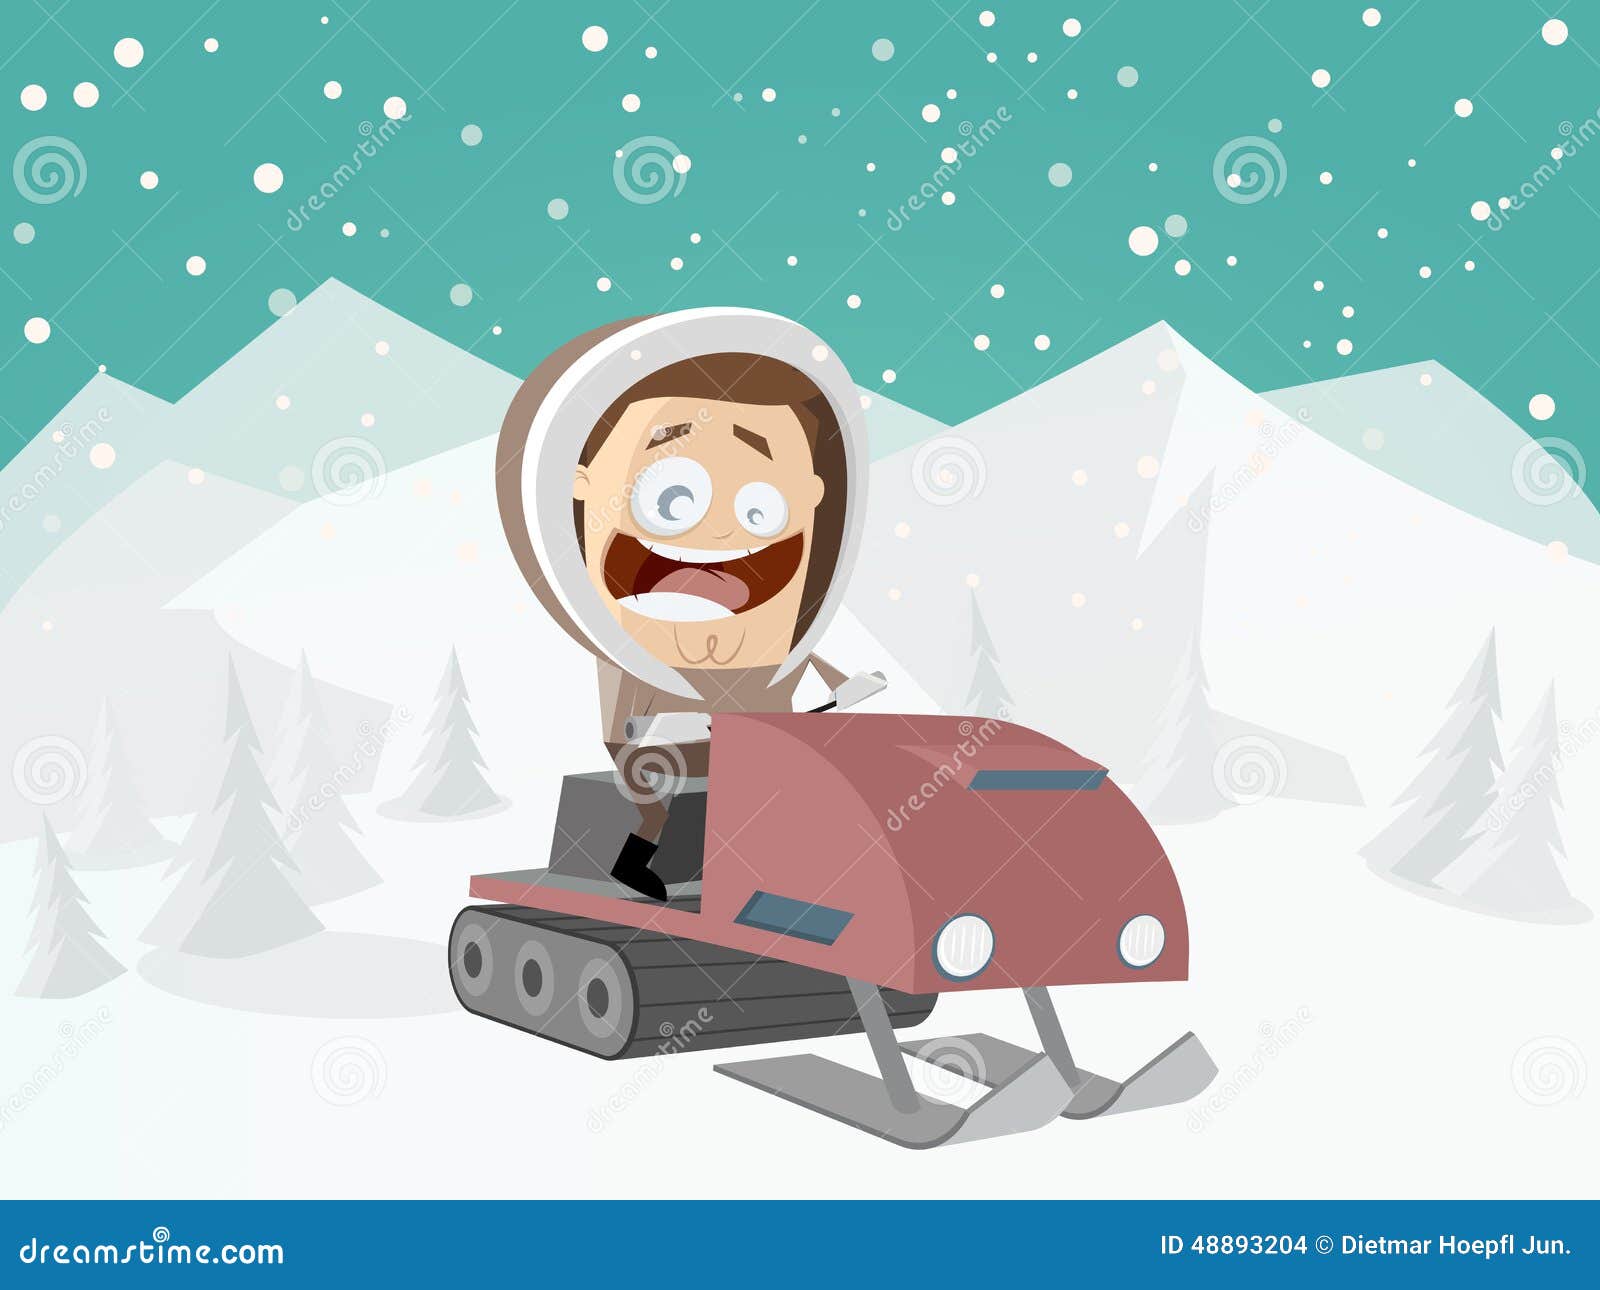 Funny Cartoon Man With Snowmobile And Winter Background Illustration  48893204 - Megapixl